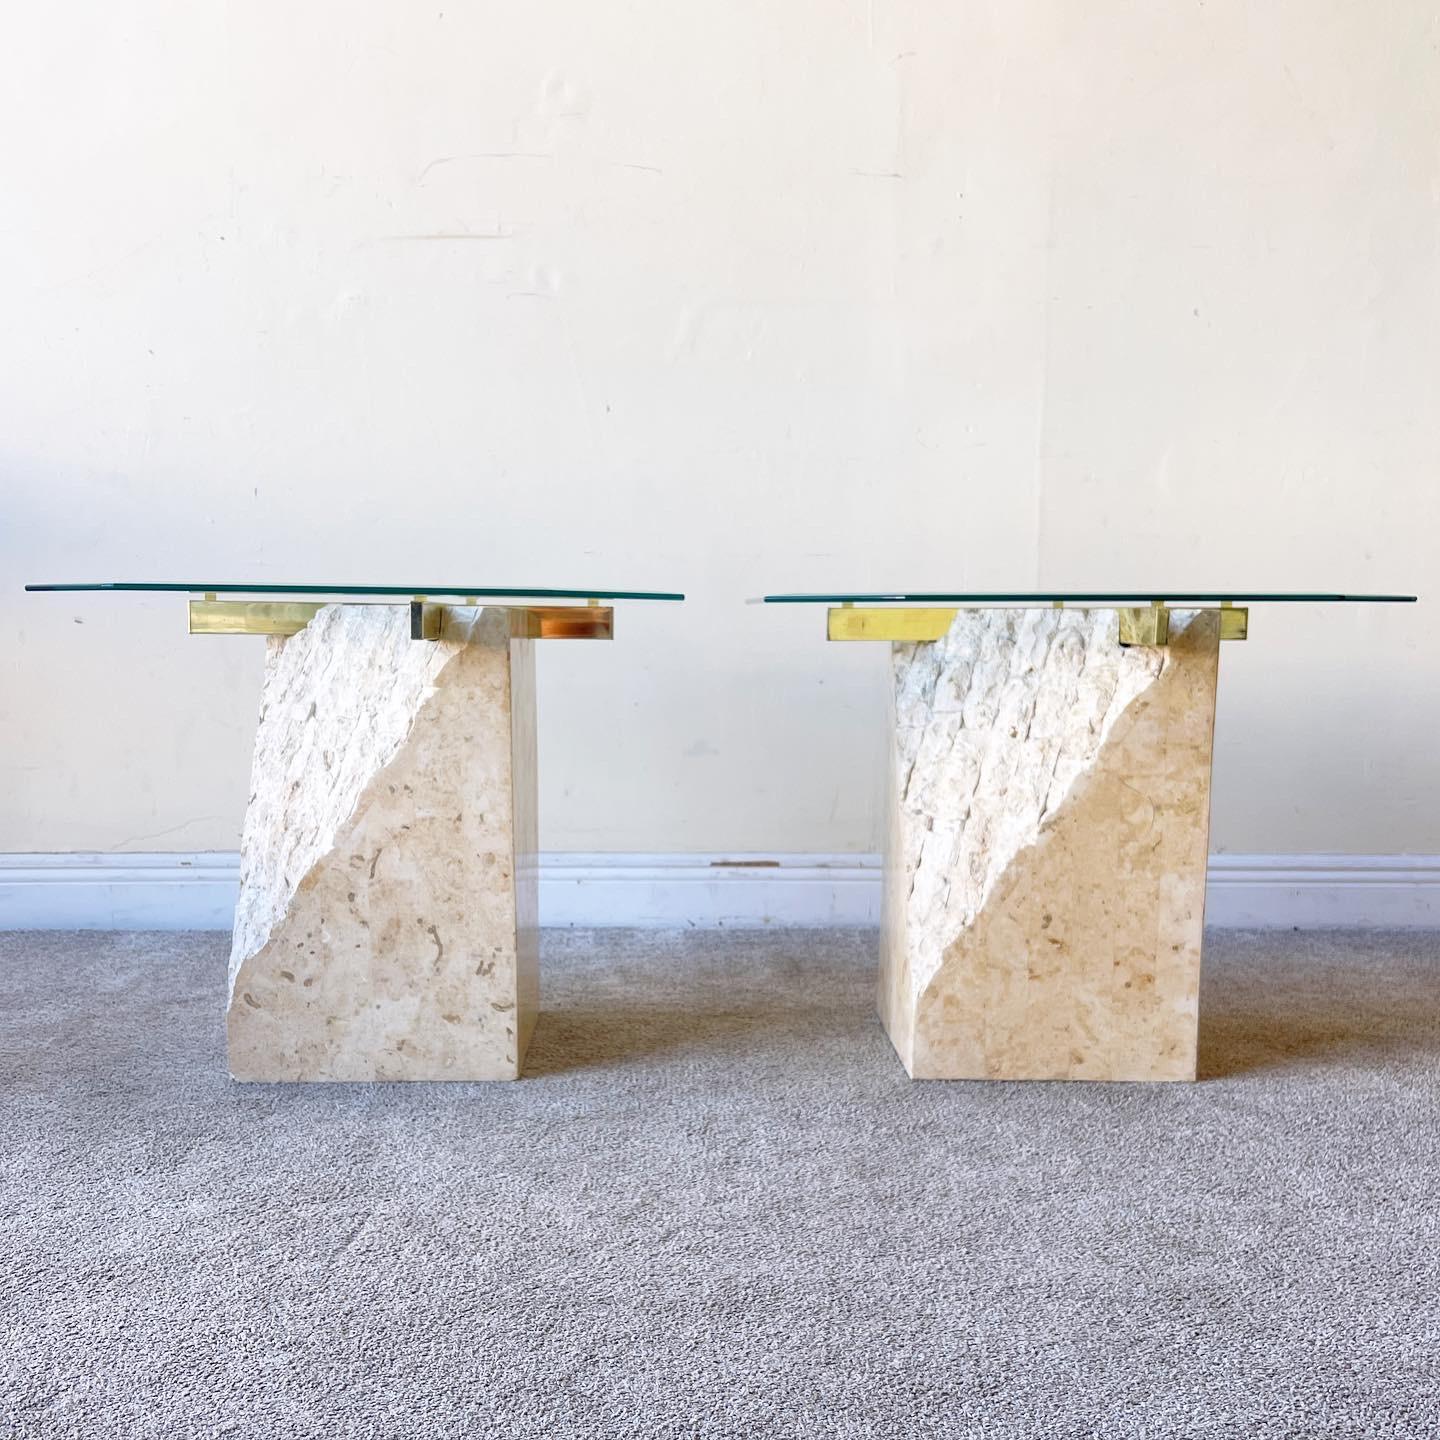 Incredible pair of tessellated stone side tables. Features a triangular slope of rough stone with the rest of the table displaying a polished stone. A brass finished cross bar at the top holds up the octagonal, beveled glass top.

Additional